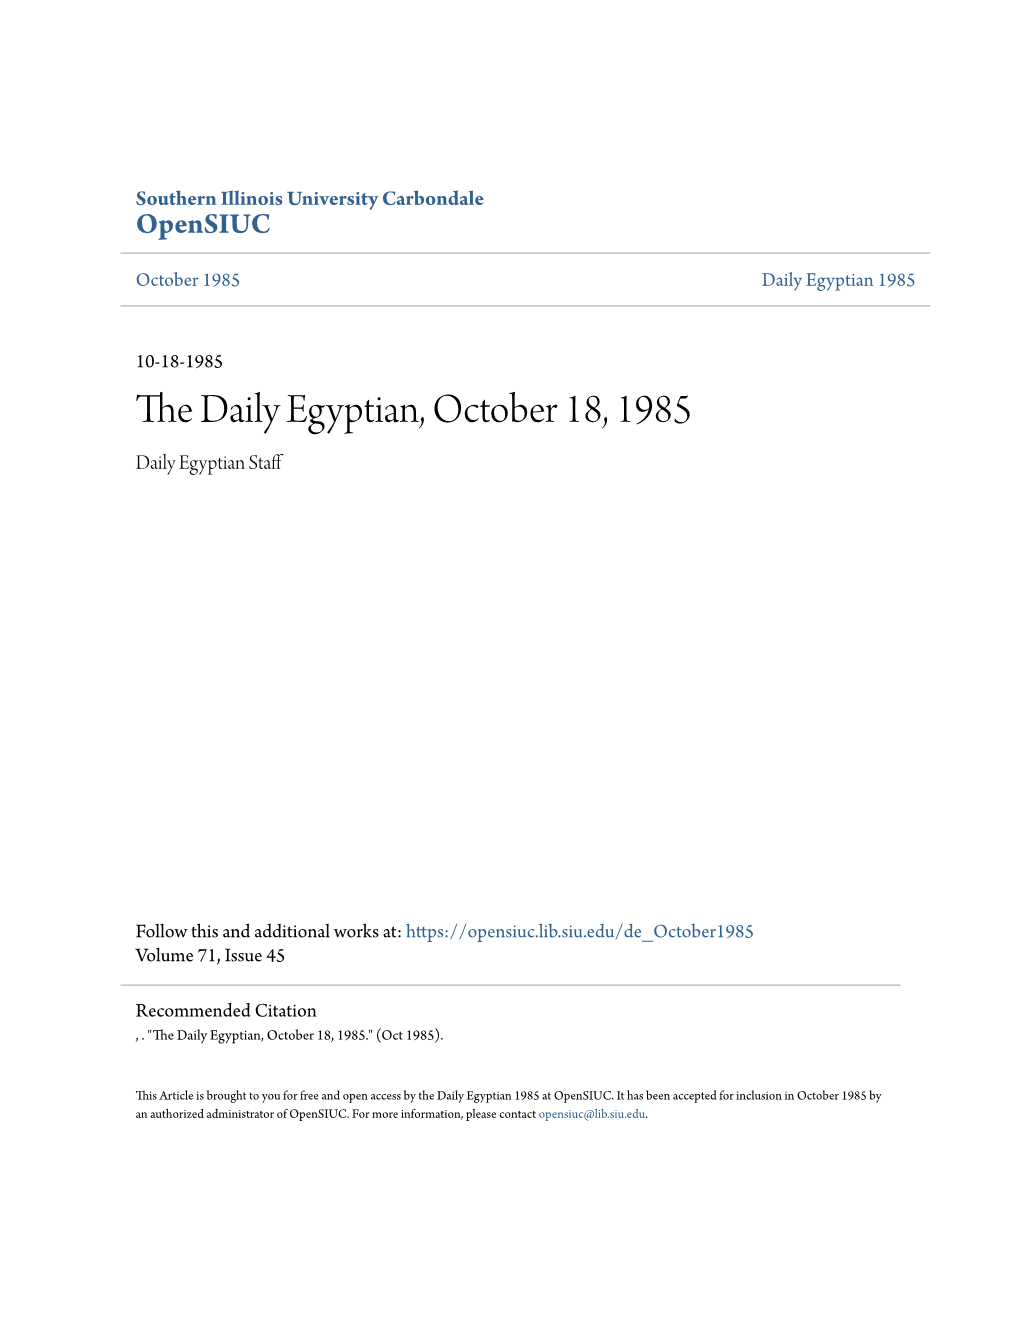 The Daily Egyptian, October 18, 1985